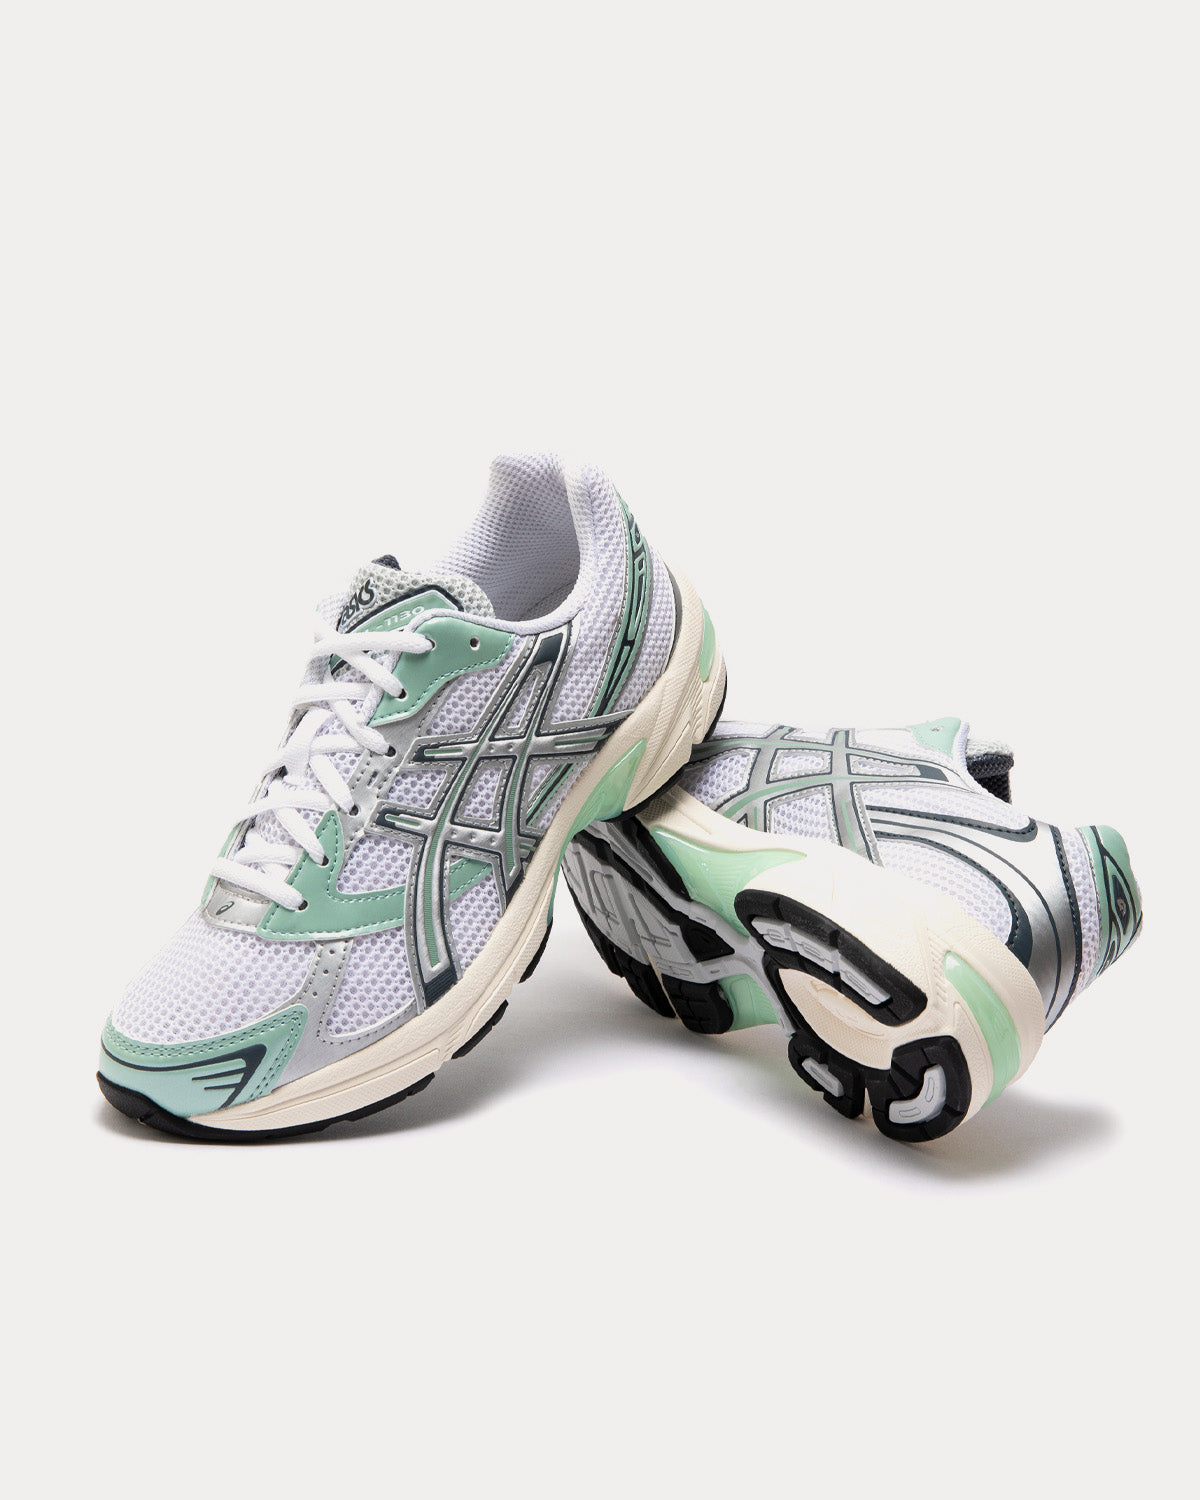 Asics x Naked CPH - GEL-1130 White / Pure Silver Running Shoes